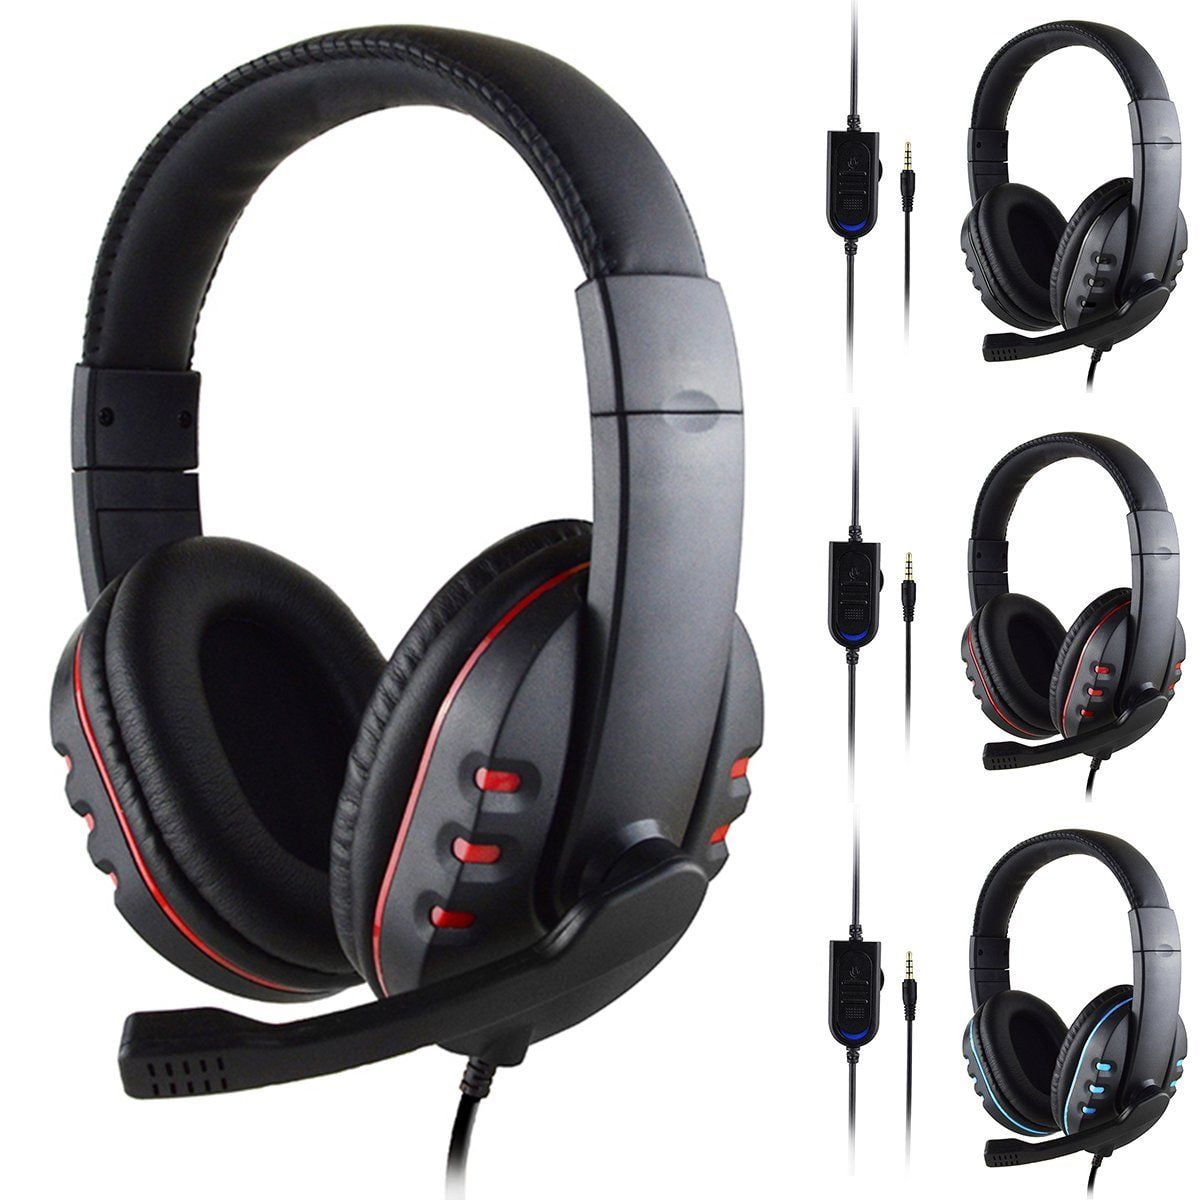 For PS4 Xbox One PC Mac 3.5mm Wired Gaming Headset Mic Stereo Surround Headphone 